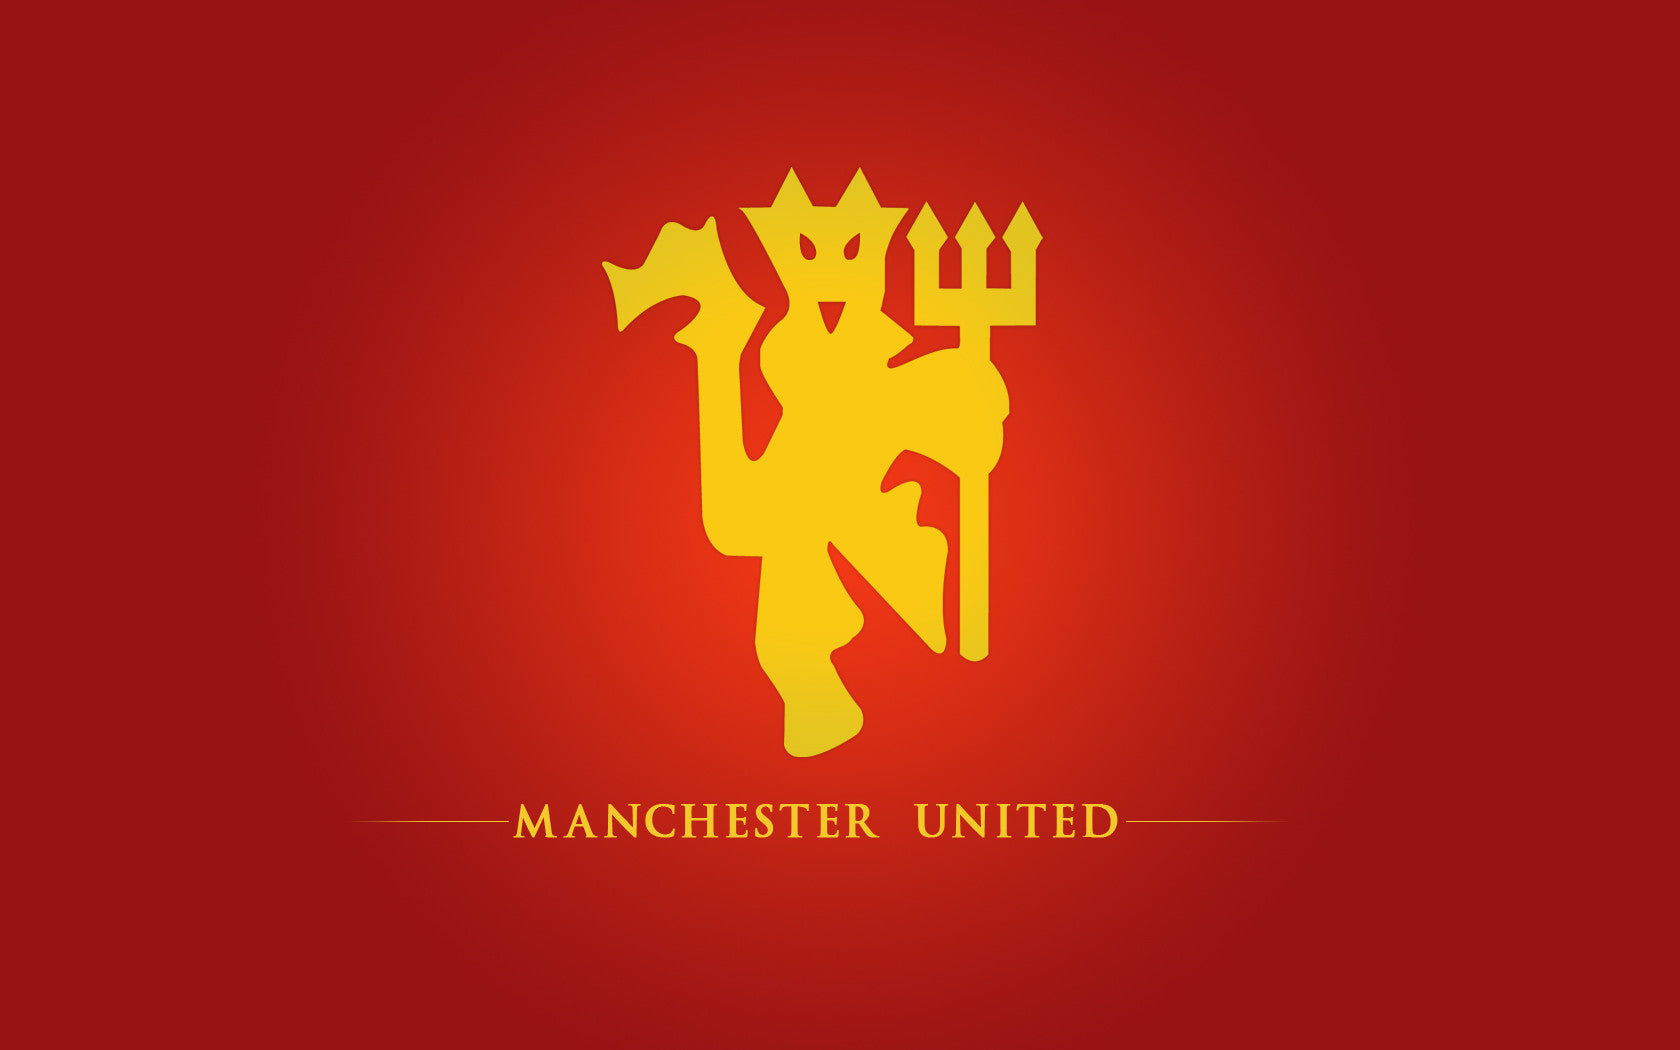 PosterGully Specials, Manchester United | Red Devils Logo, - PosterGully